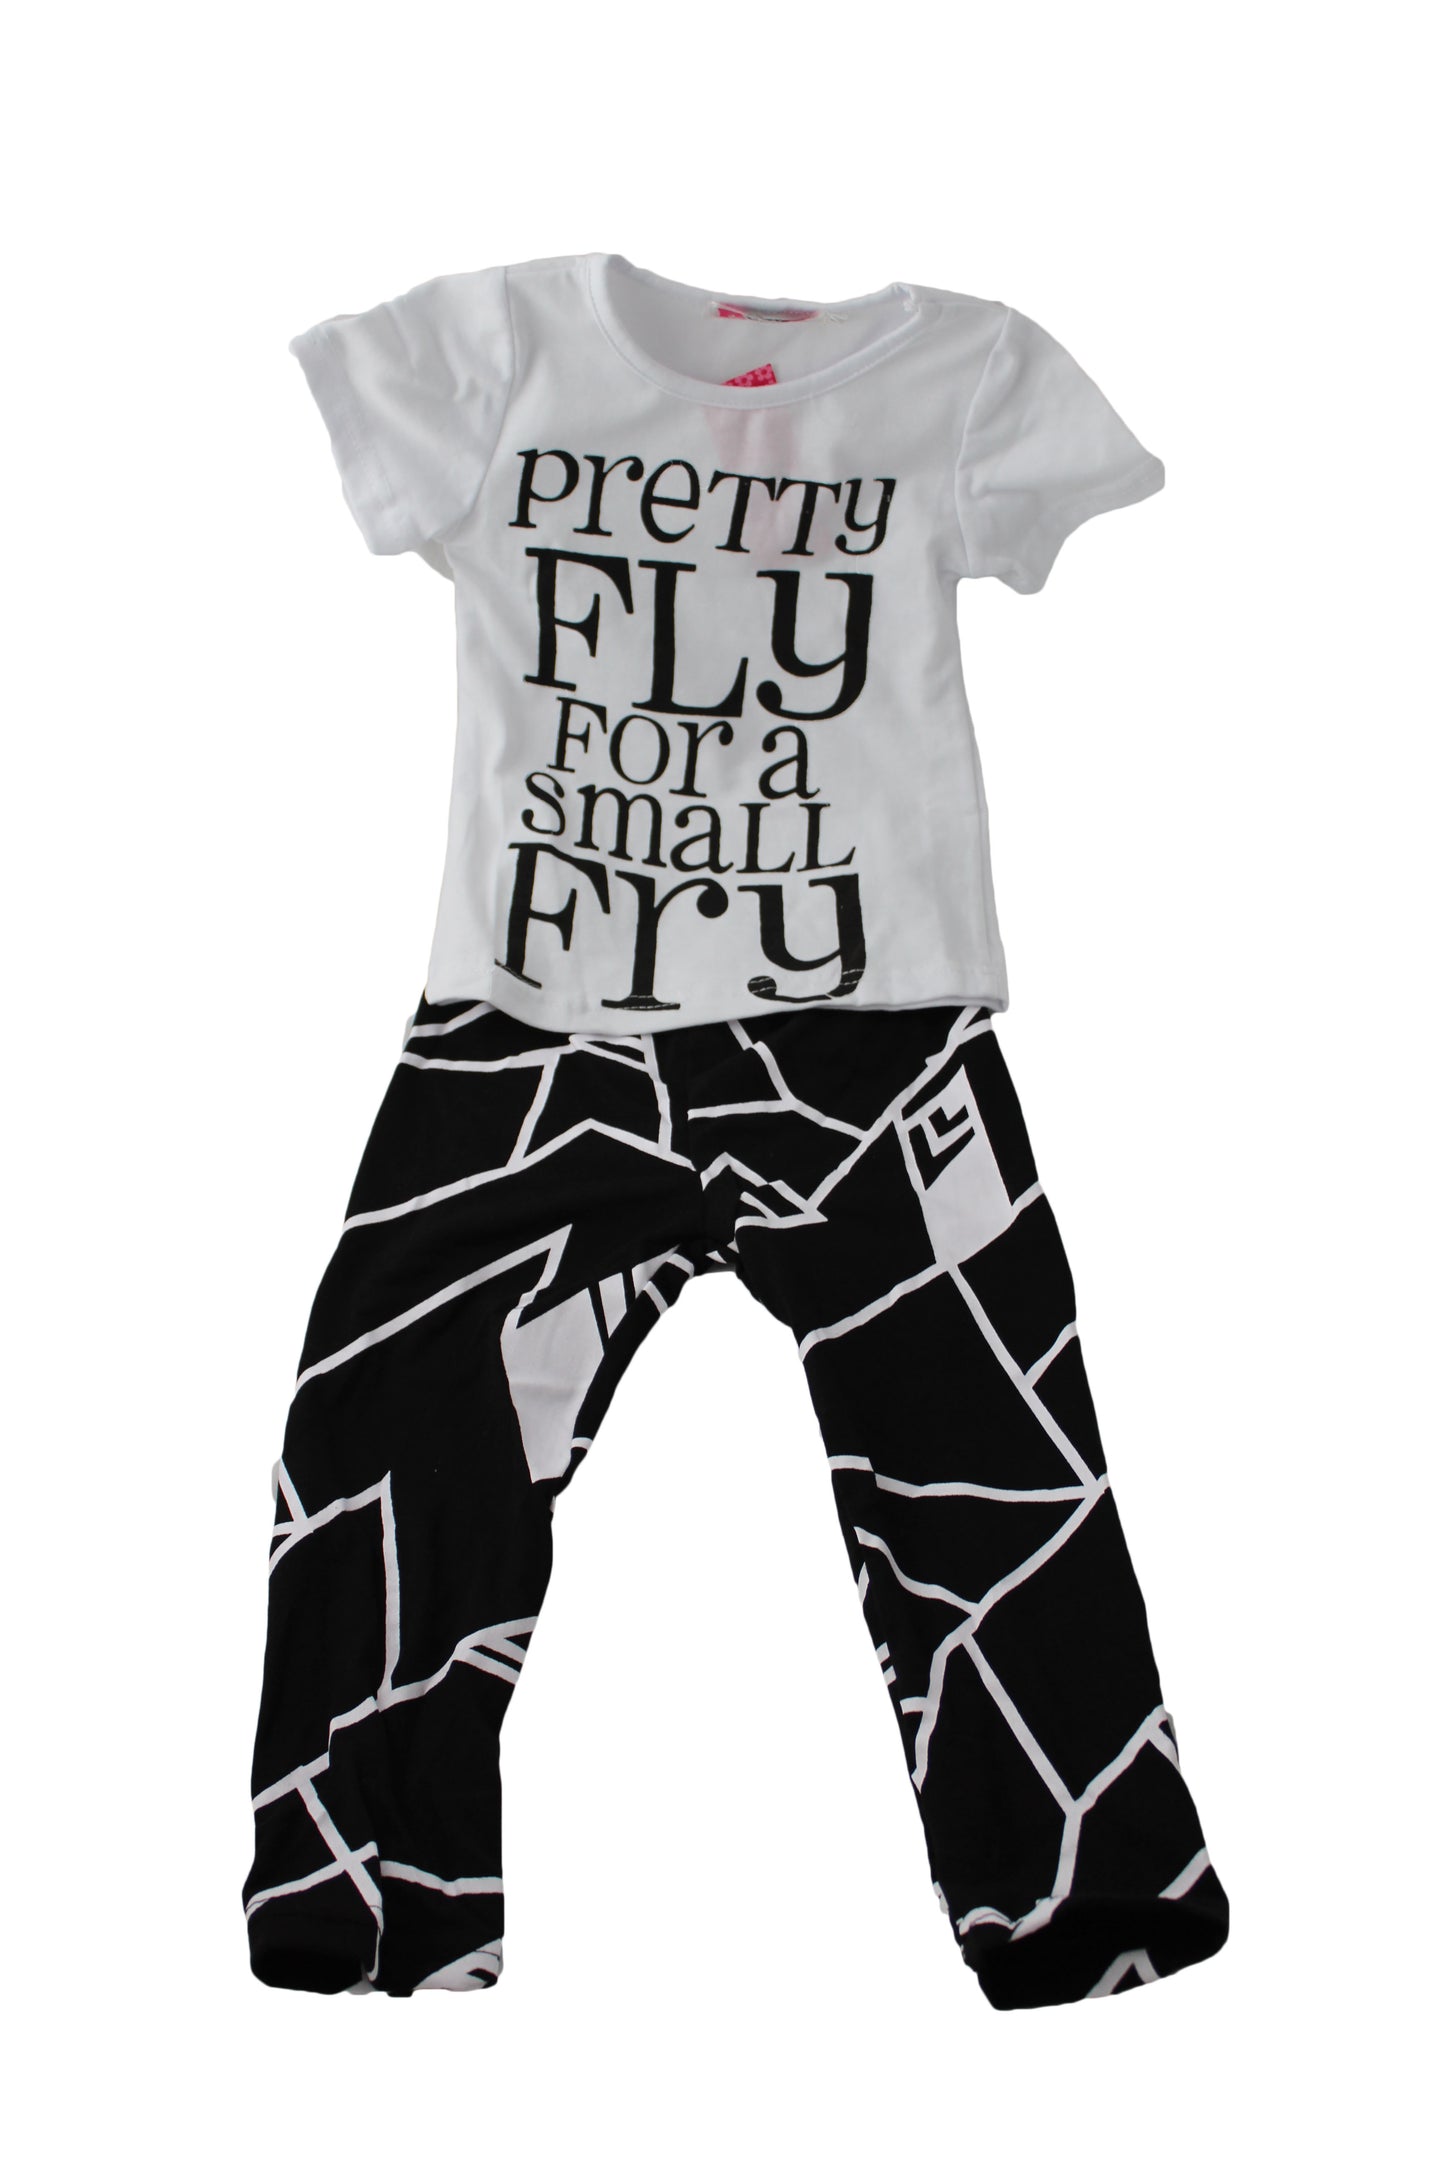 Pretty Fly for a Small Fry – Toddler 2PC Outfit - BuyAbility South Africa